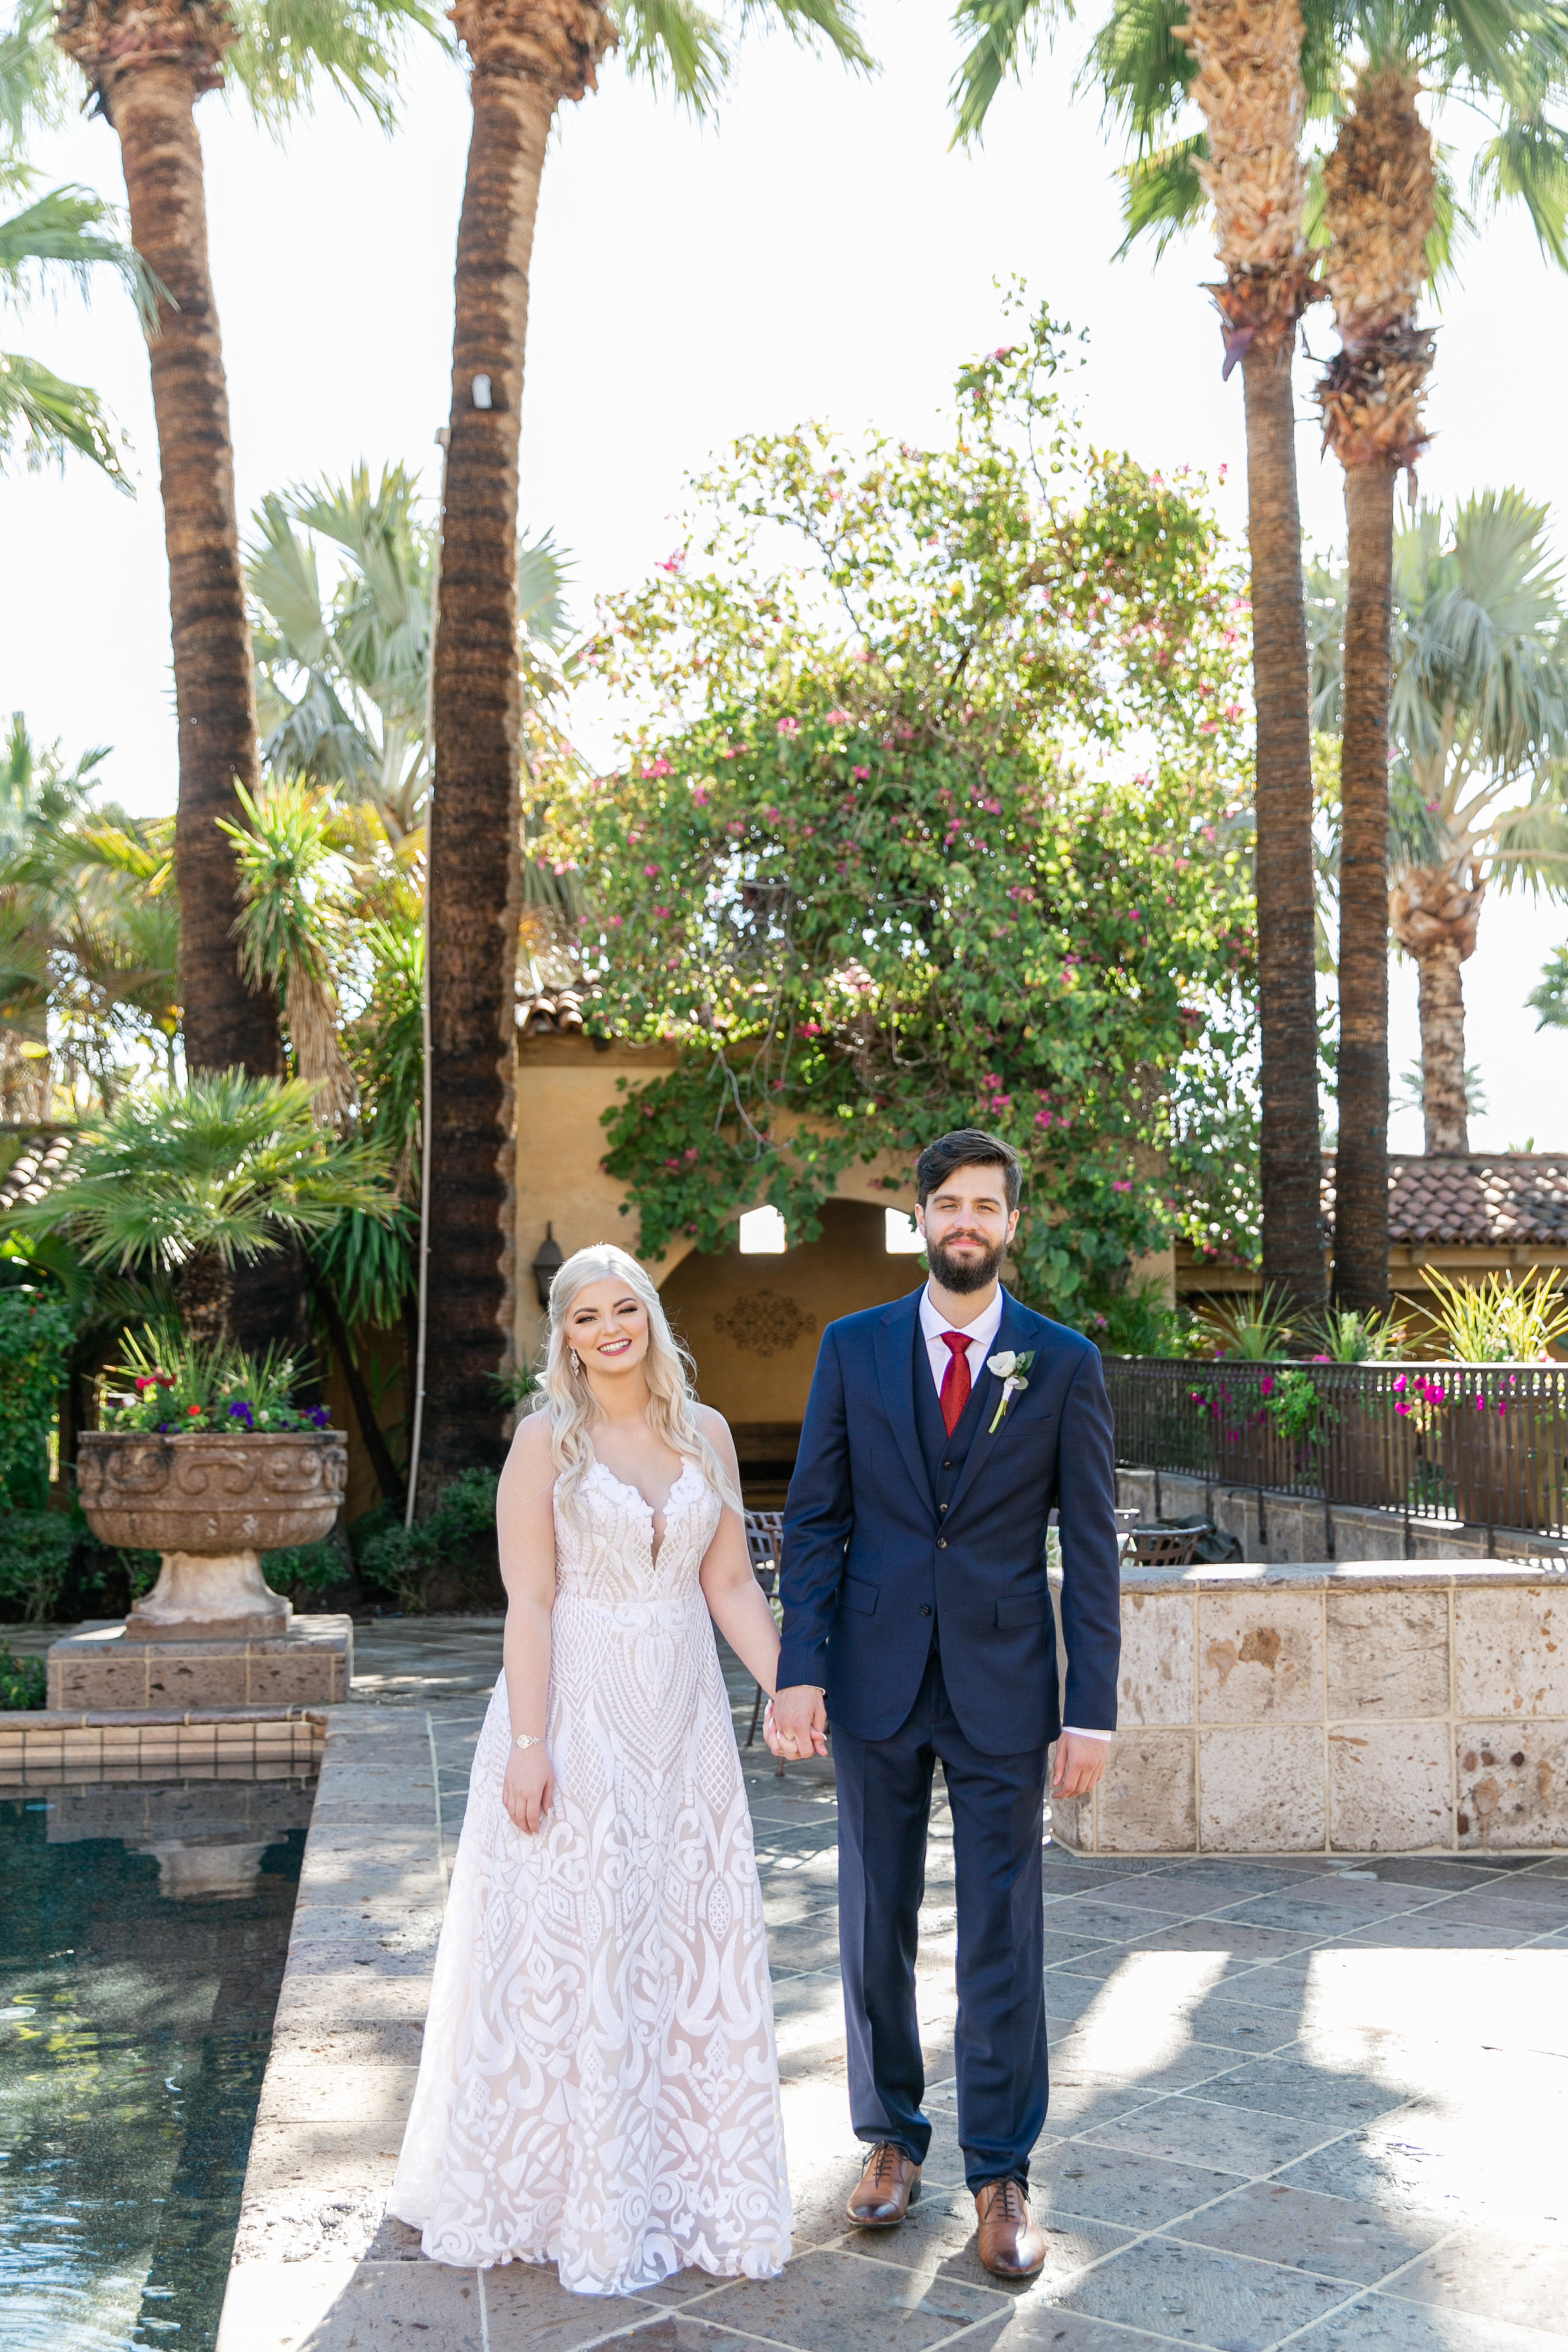 Karlie Colleen Photography - The Royal Palms Wedding - Some Like It Classic - Alex & Sam-135